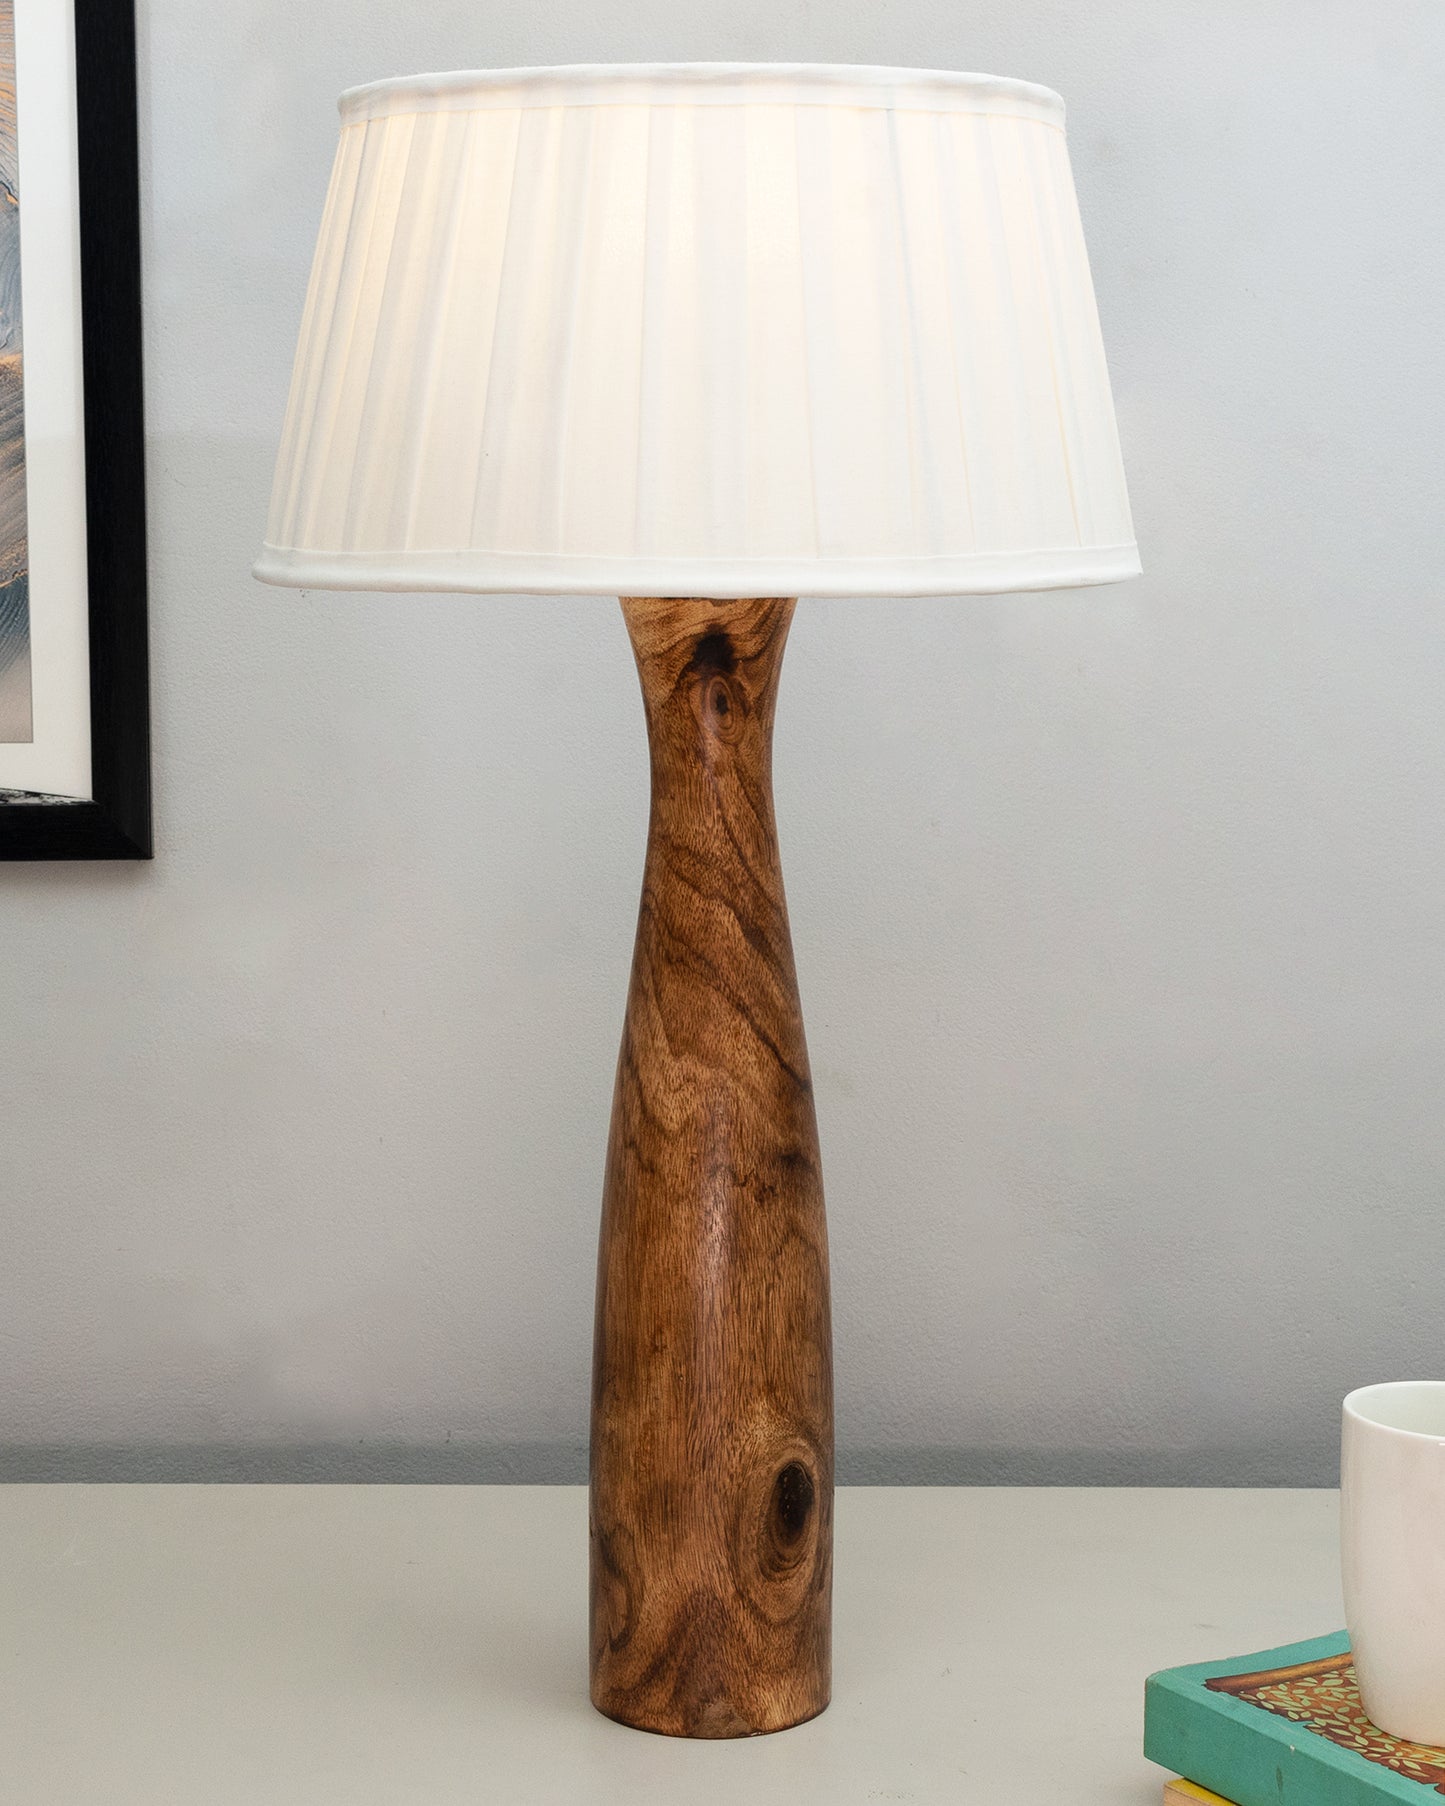 Antique Solid Timber Turned table lamp with Empire Pleated Shade